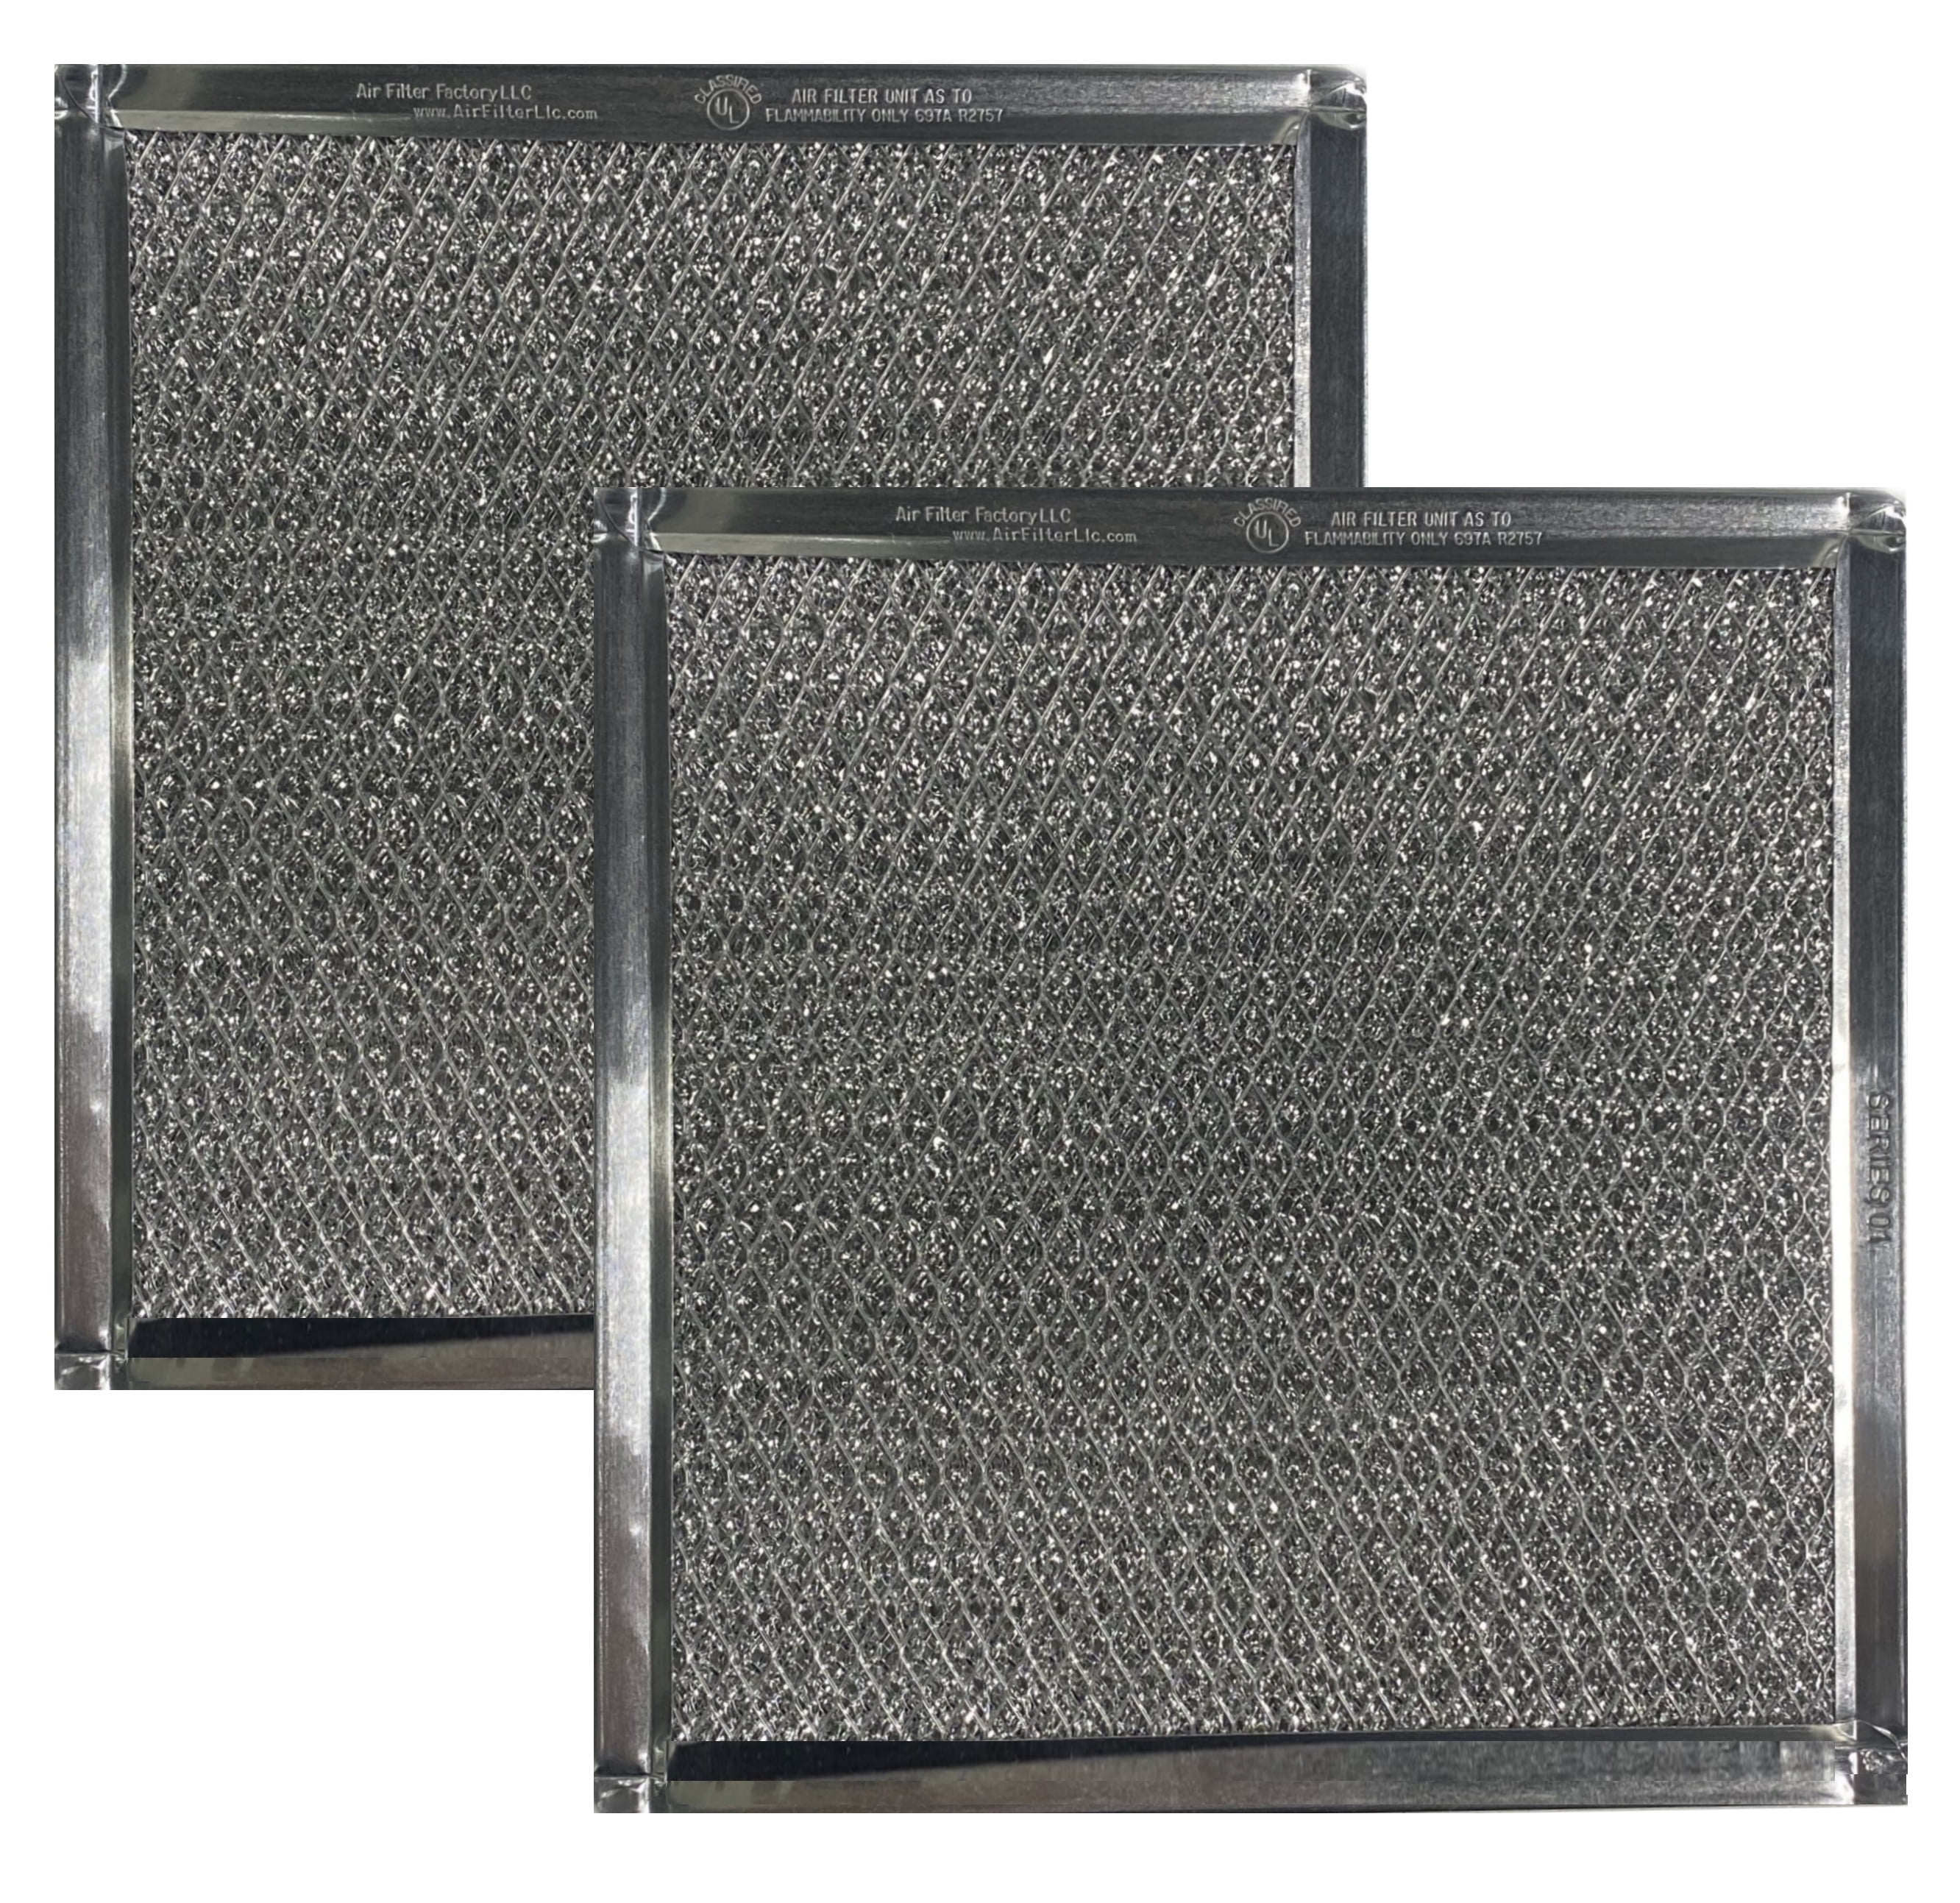 Beaquicy WB06X10596 Microwave Grease Filter Microwave Aluminum Mesh Filter Replacement for GE Microwaves 2 Pack